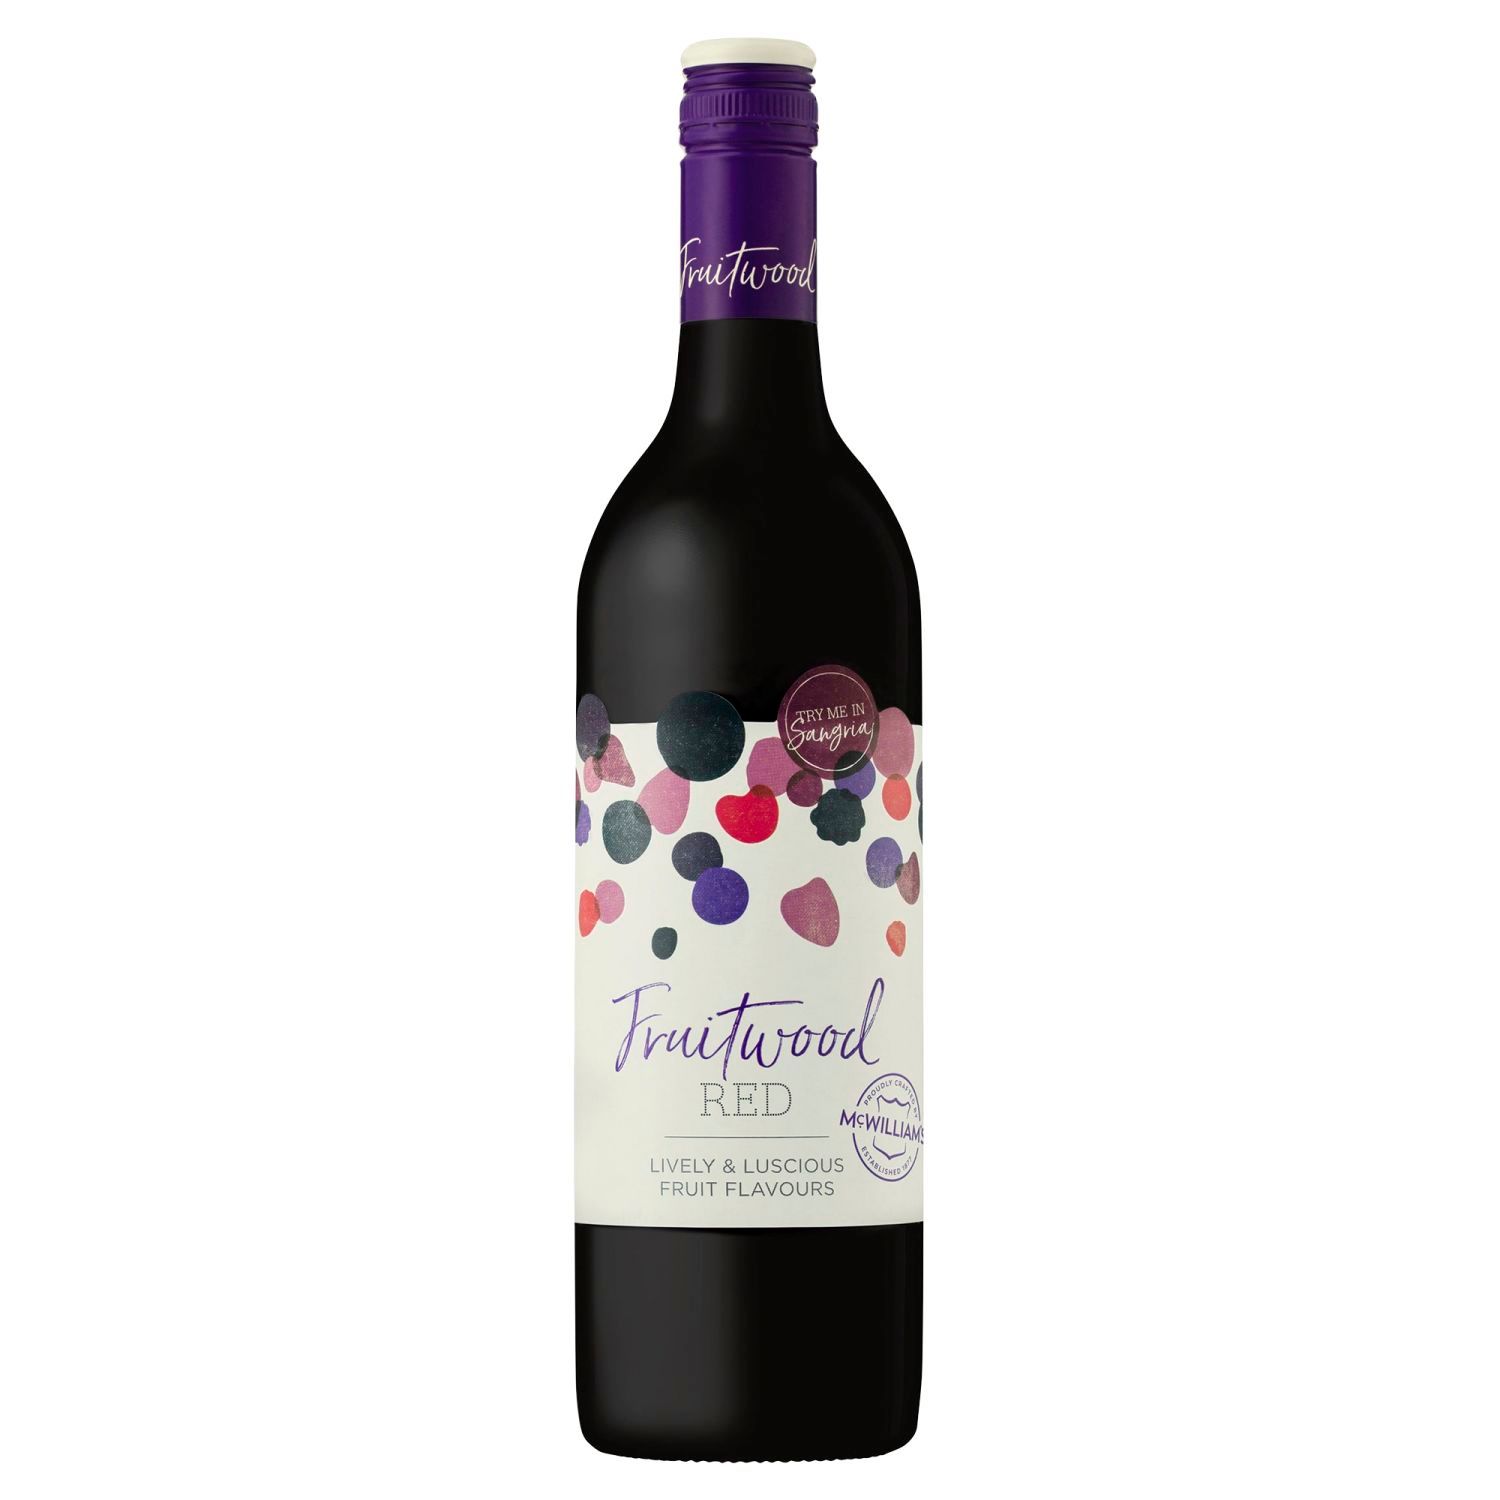 Thinking of a cheeky catch up with friends? With luscious cherry-sweet fruit characters and a smooth finish, this easy drinking wine is sure to make your night shine! Try me in sangria!<br /> <br />Alcohol Volume: 8.50%<br /><br />Pack Format: Bottle<br /><br />Standard Drinks: 5</br /><br />Pack Type: Bottle<br /><br />Country of Origin: Australia<br /><br />Region: Australia<br /><br />Vintage: Non Vintage<br />